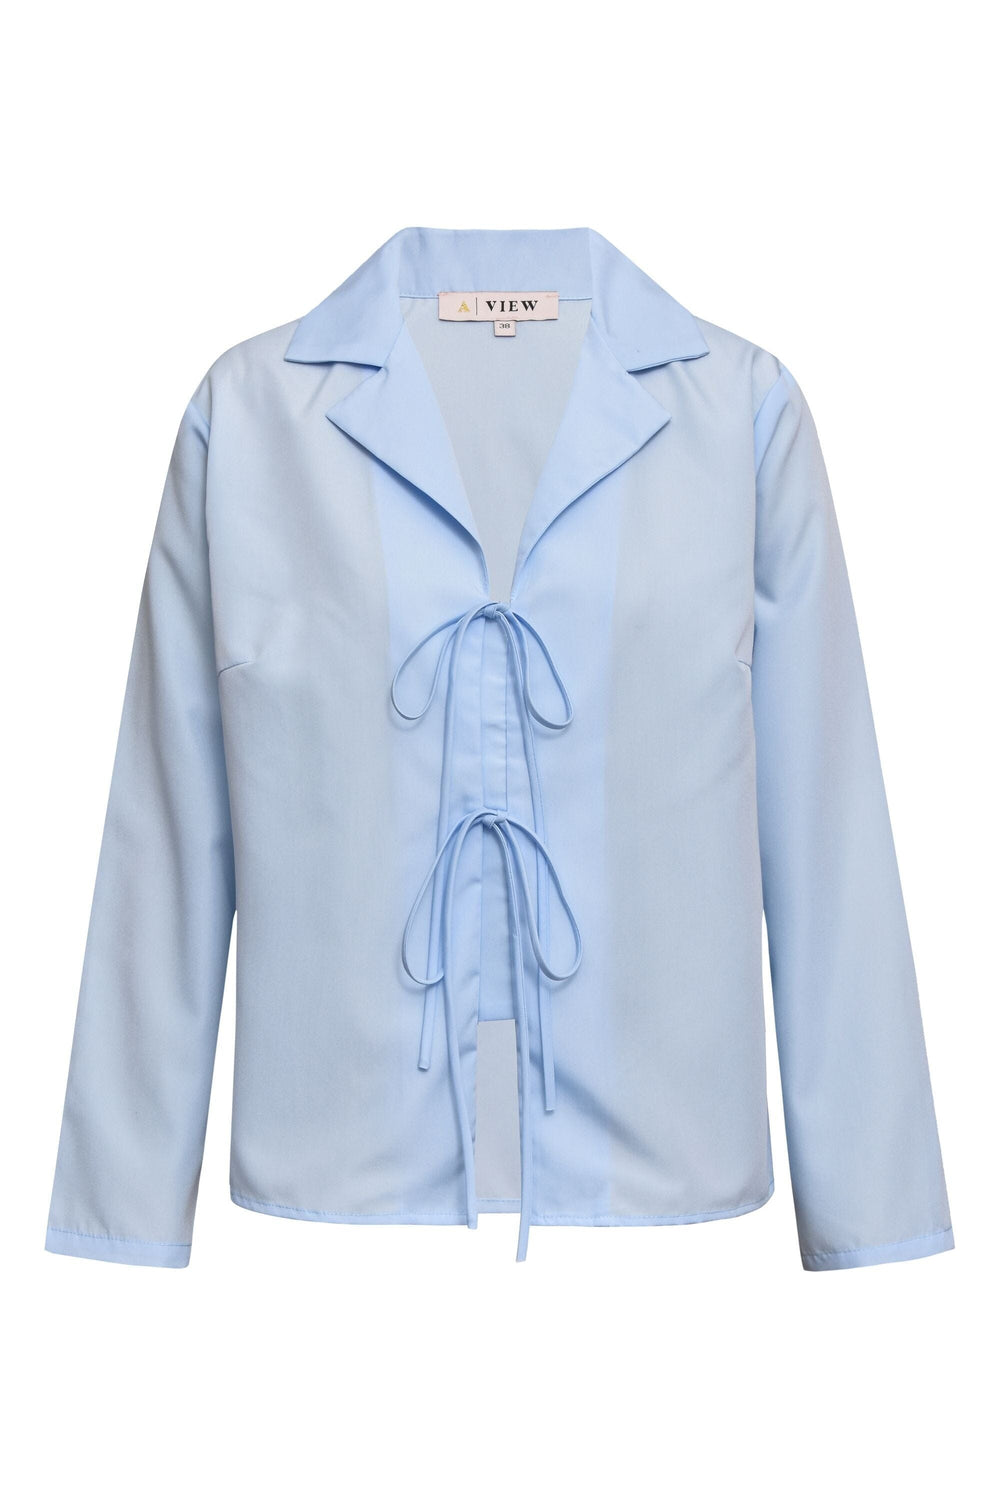 A-VIEW - Marley Blouse - 282 Light Blue Bluser 